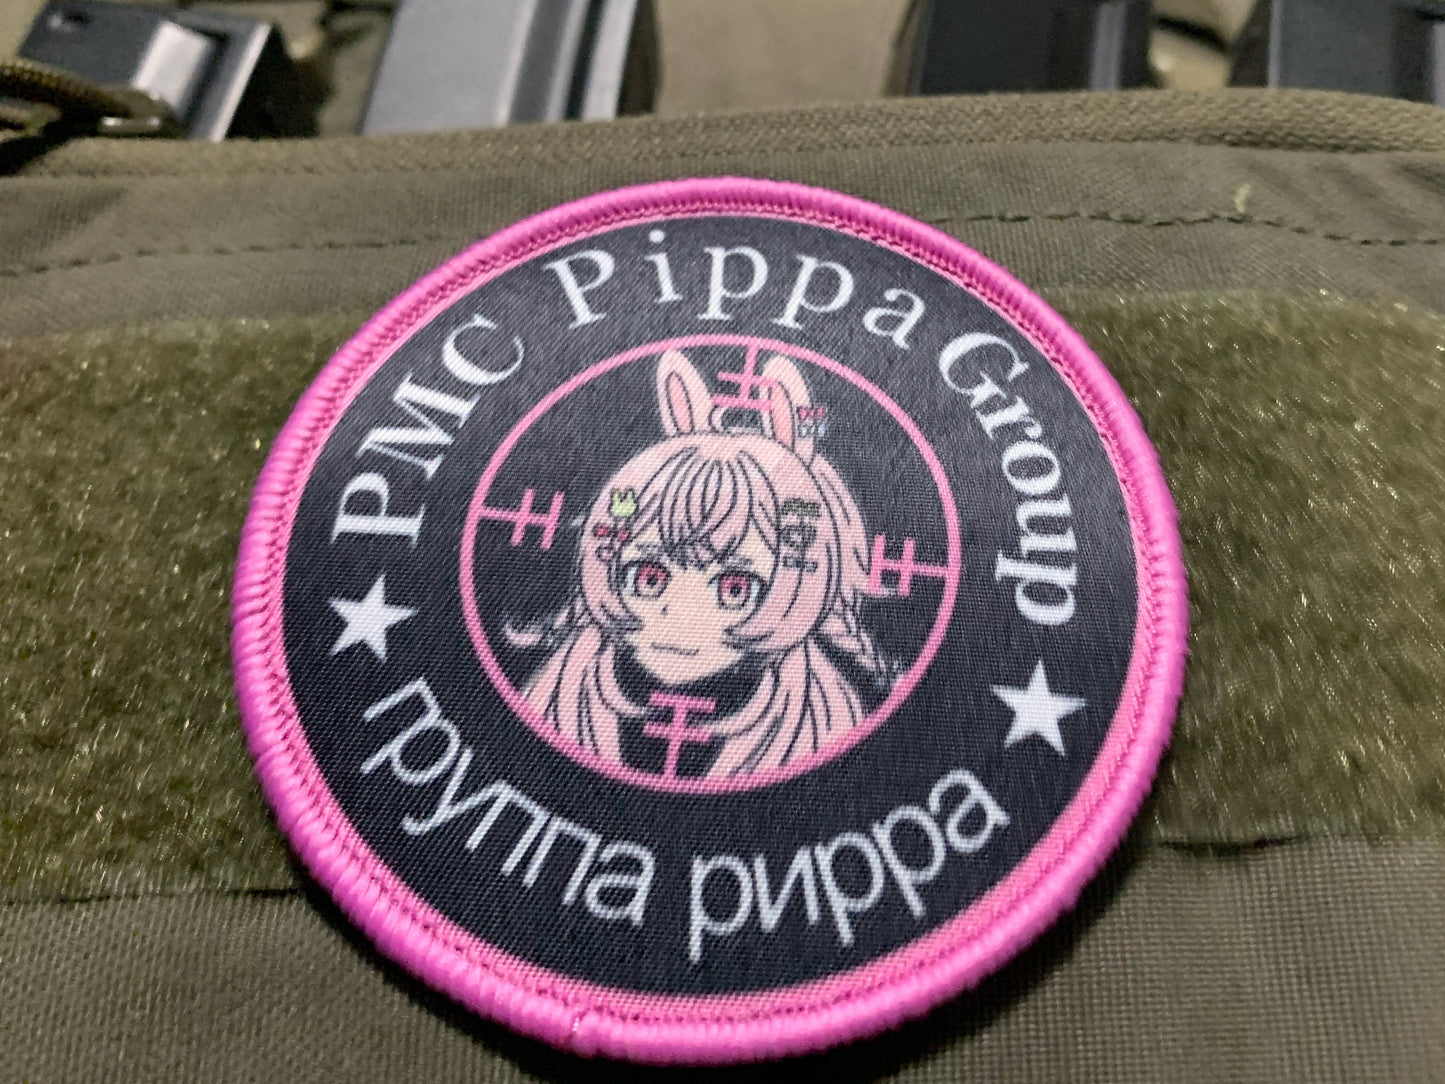 PMC Pipkin Pippa Group Phase Connect Meme Morale Patch or Sticker